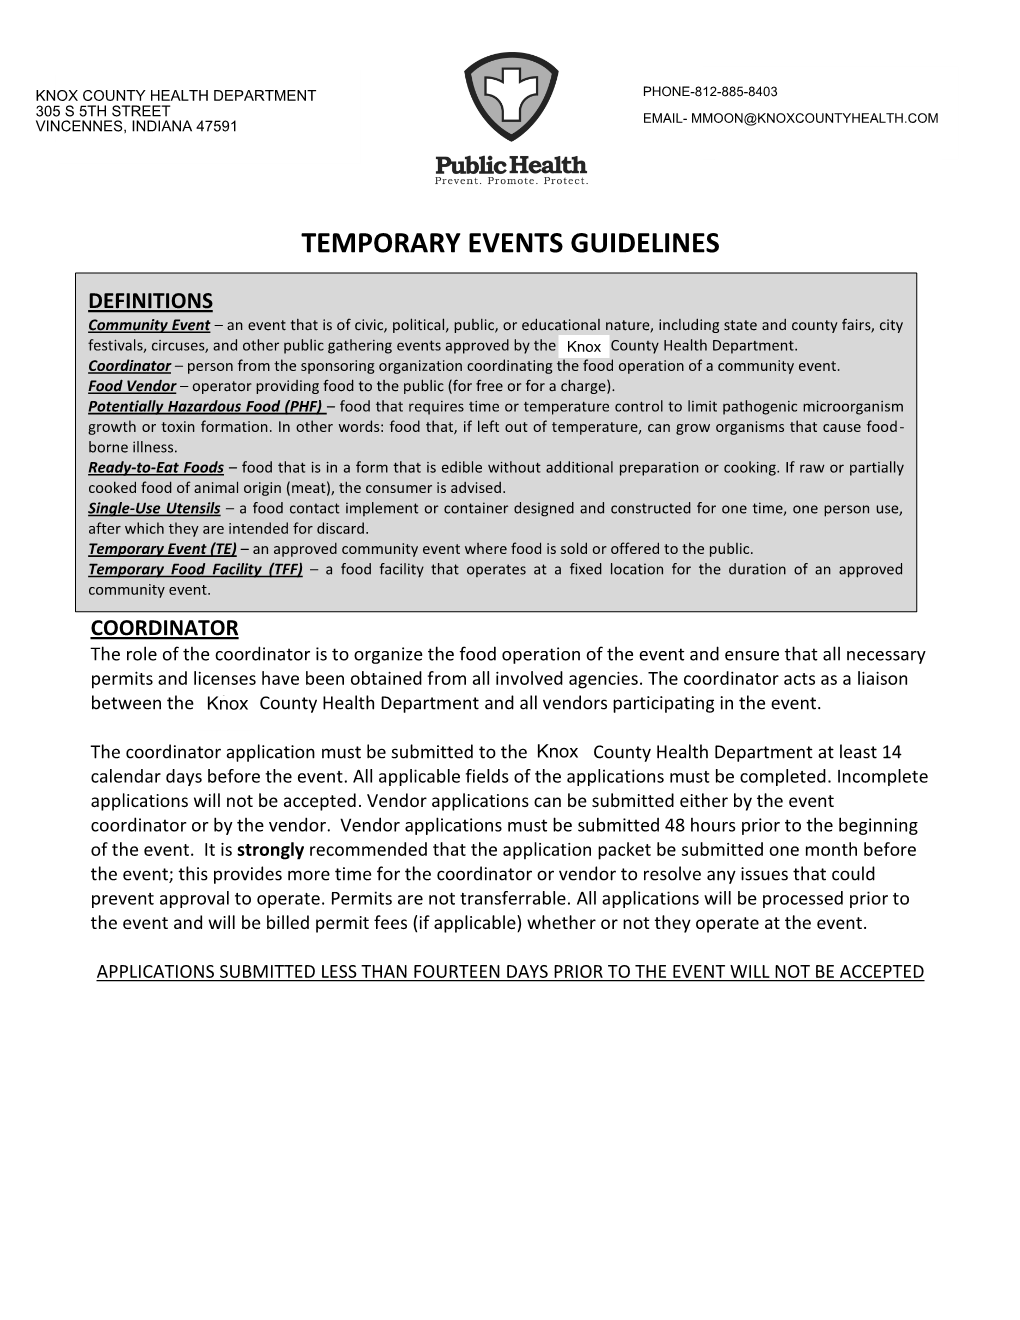 Temp-Event-Guidelines-2